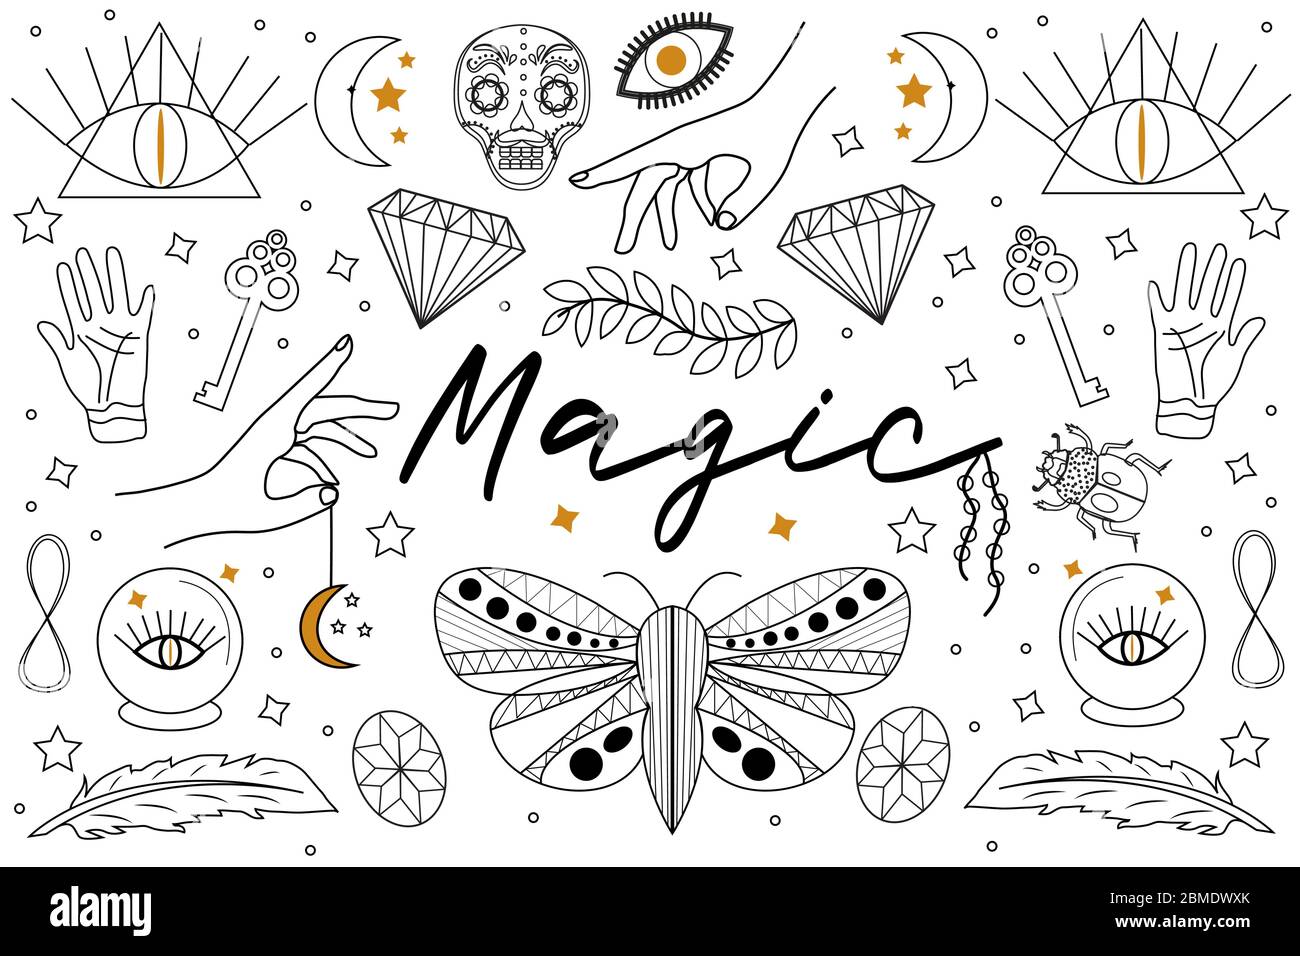 Magic Hand drawn, doodle, sketch line style set. Witchcraft symbols.Ethnic esoteric collection with hands, moon, crystals, plant, eye, palmistry and Stock Vector